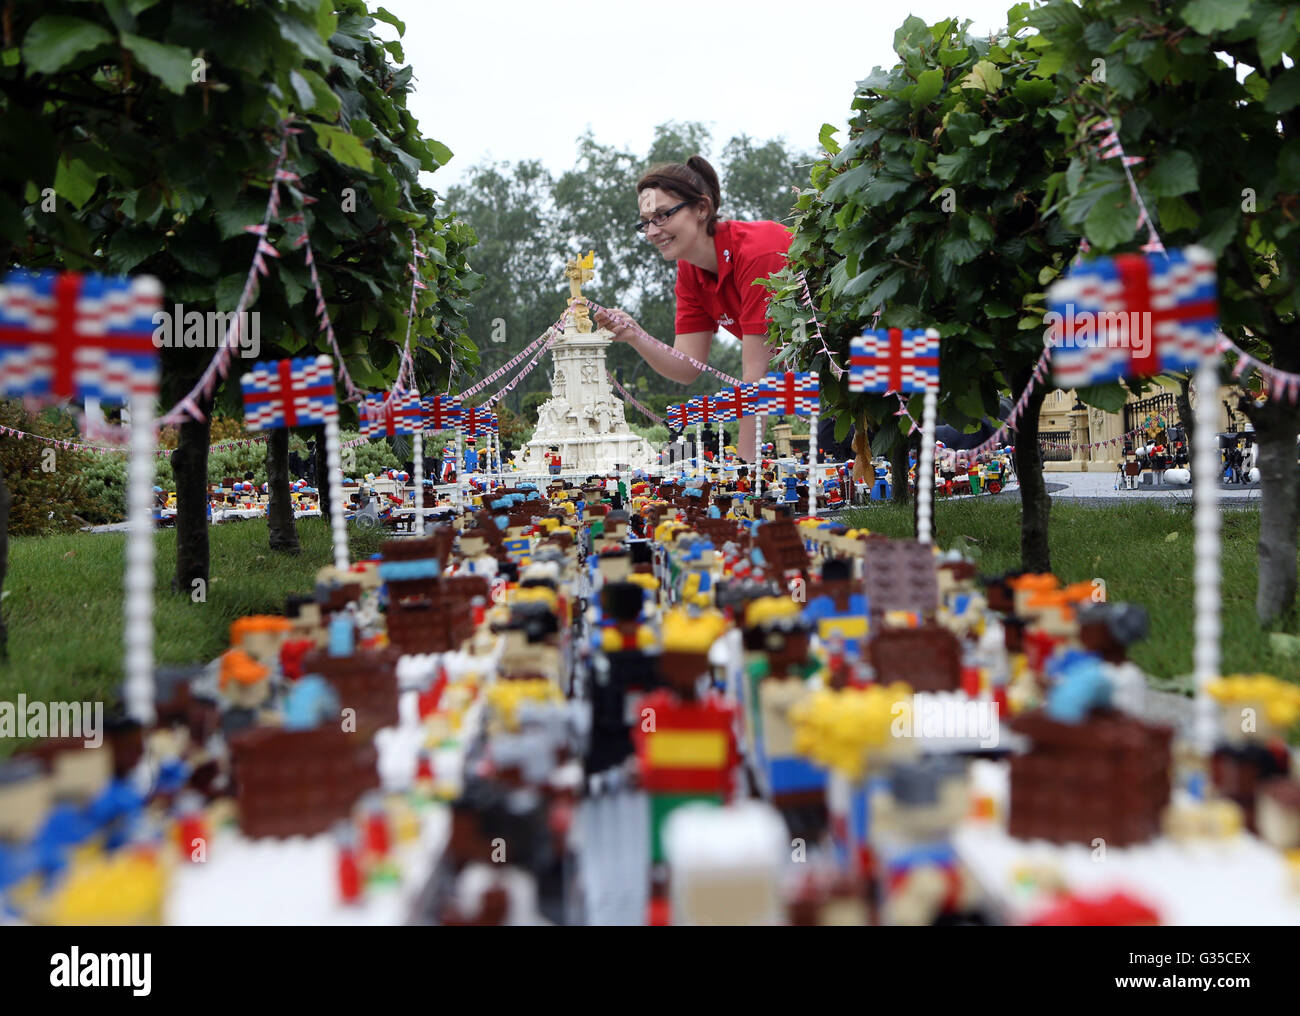 LEGOLAND Windsor Resort model maker Kat James puts the finishing touches to a miniature street party outside a model of Buckingham Palace in Miniland ahead of the Patron's Lunch on The Mall in London to mark the Queen's official 90th birthday on June 12. Stock Photo